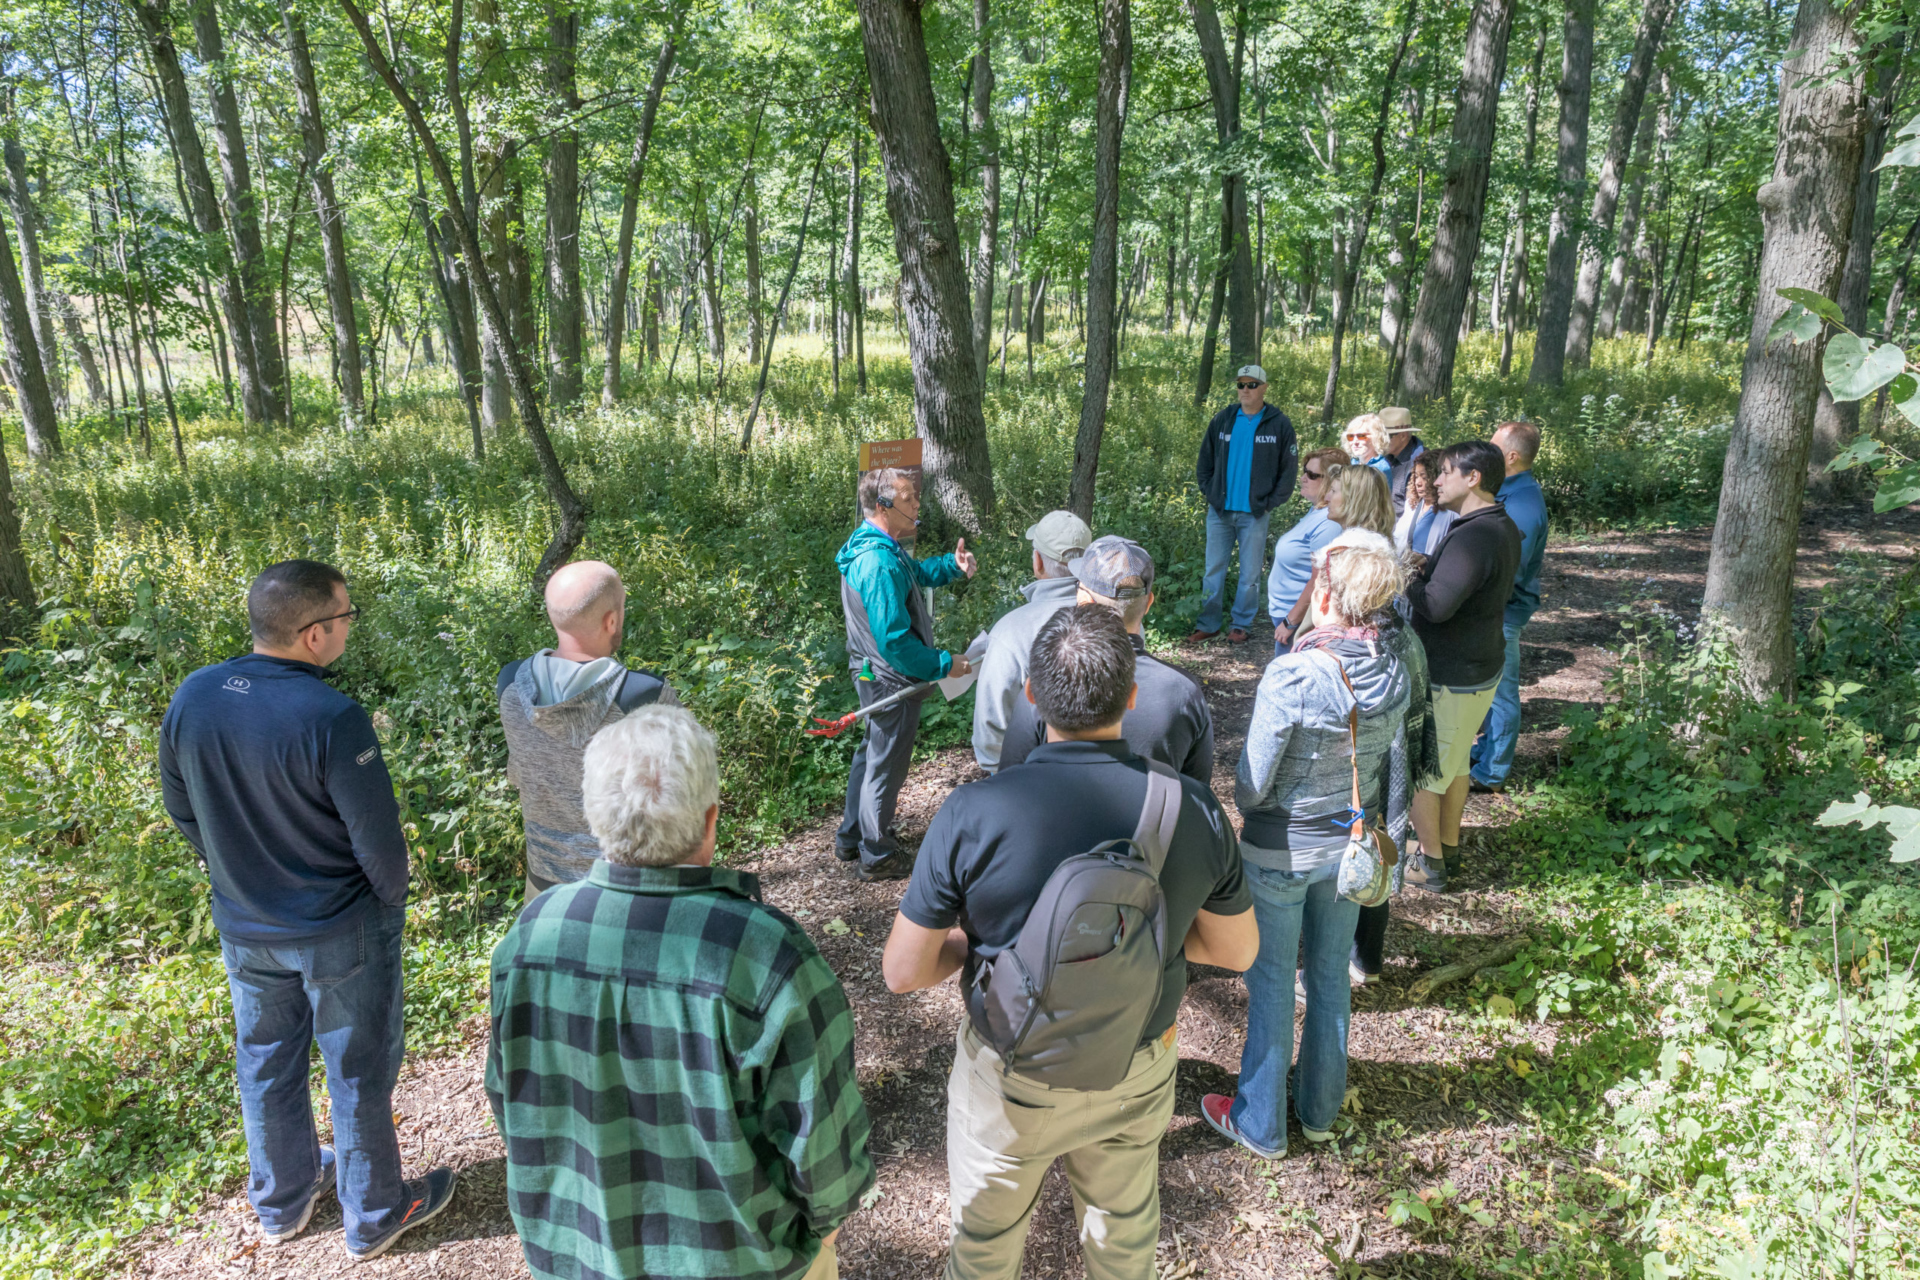 Kris Bachtell leads a group on a hike to learn about oaks and their connection to the making of whiskey.